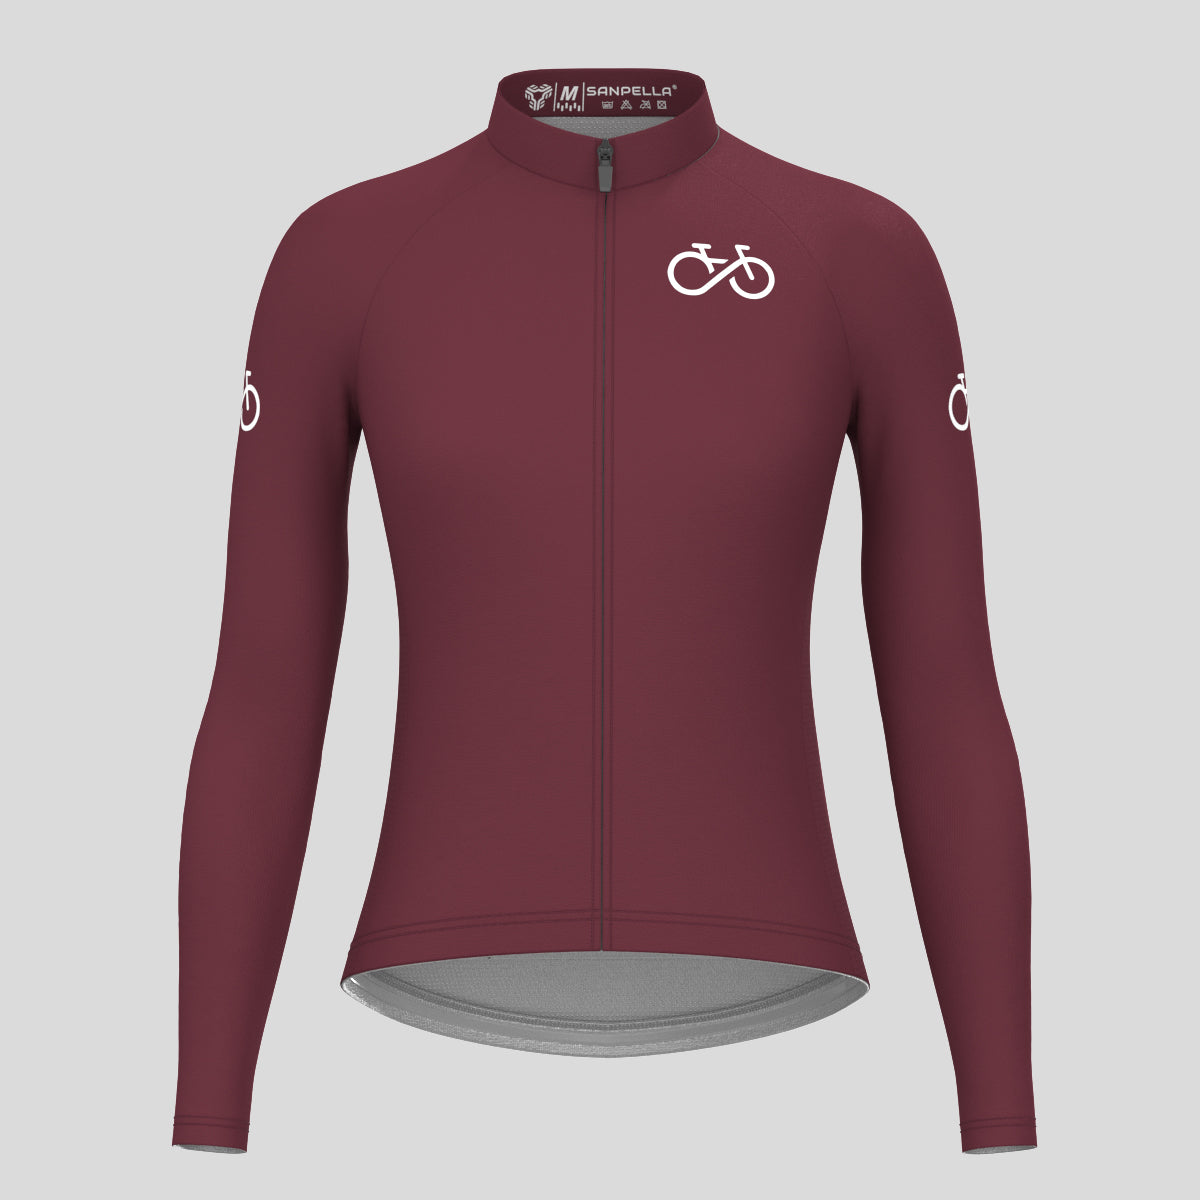 Ride Forever Women's LS Cycling Jersey - Plum